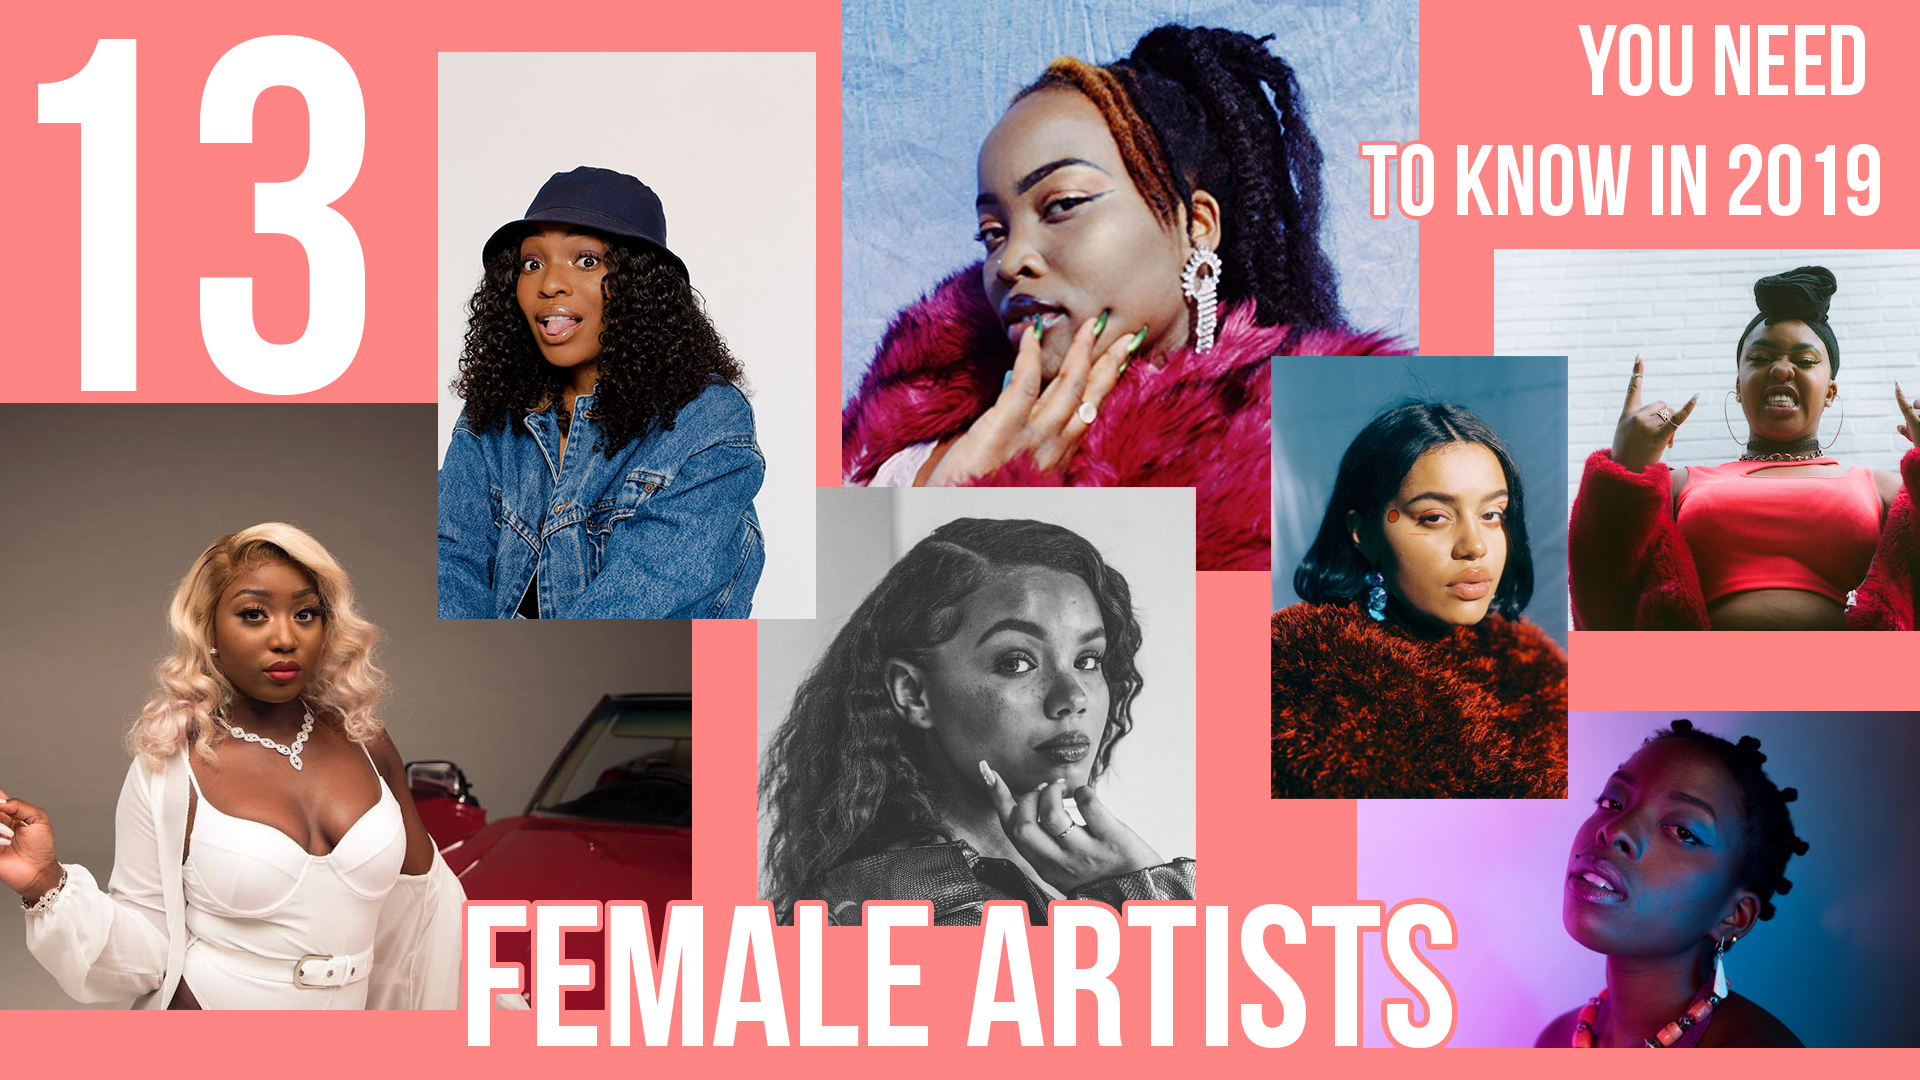 13 Female Artists You Need to Know in 2019 featuring [@adigerwww],[@Br3nya], [@lifeofrae_],[@cassierytz] and more…